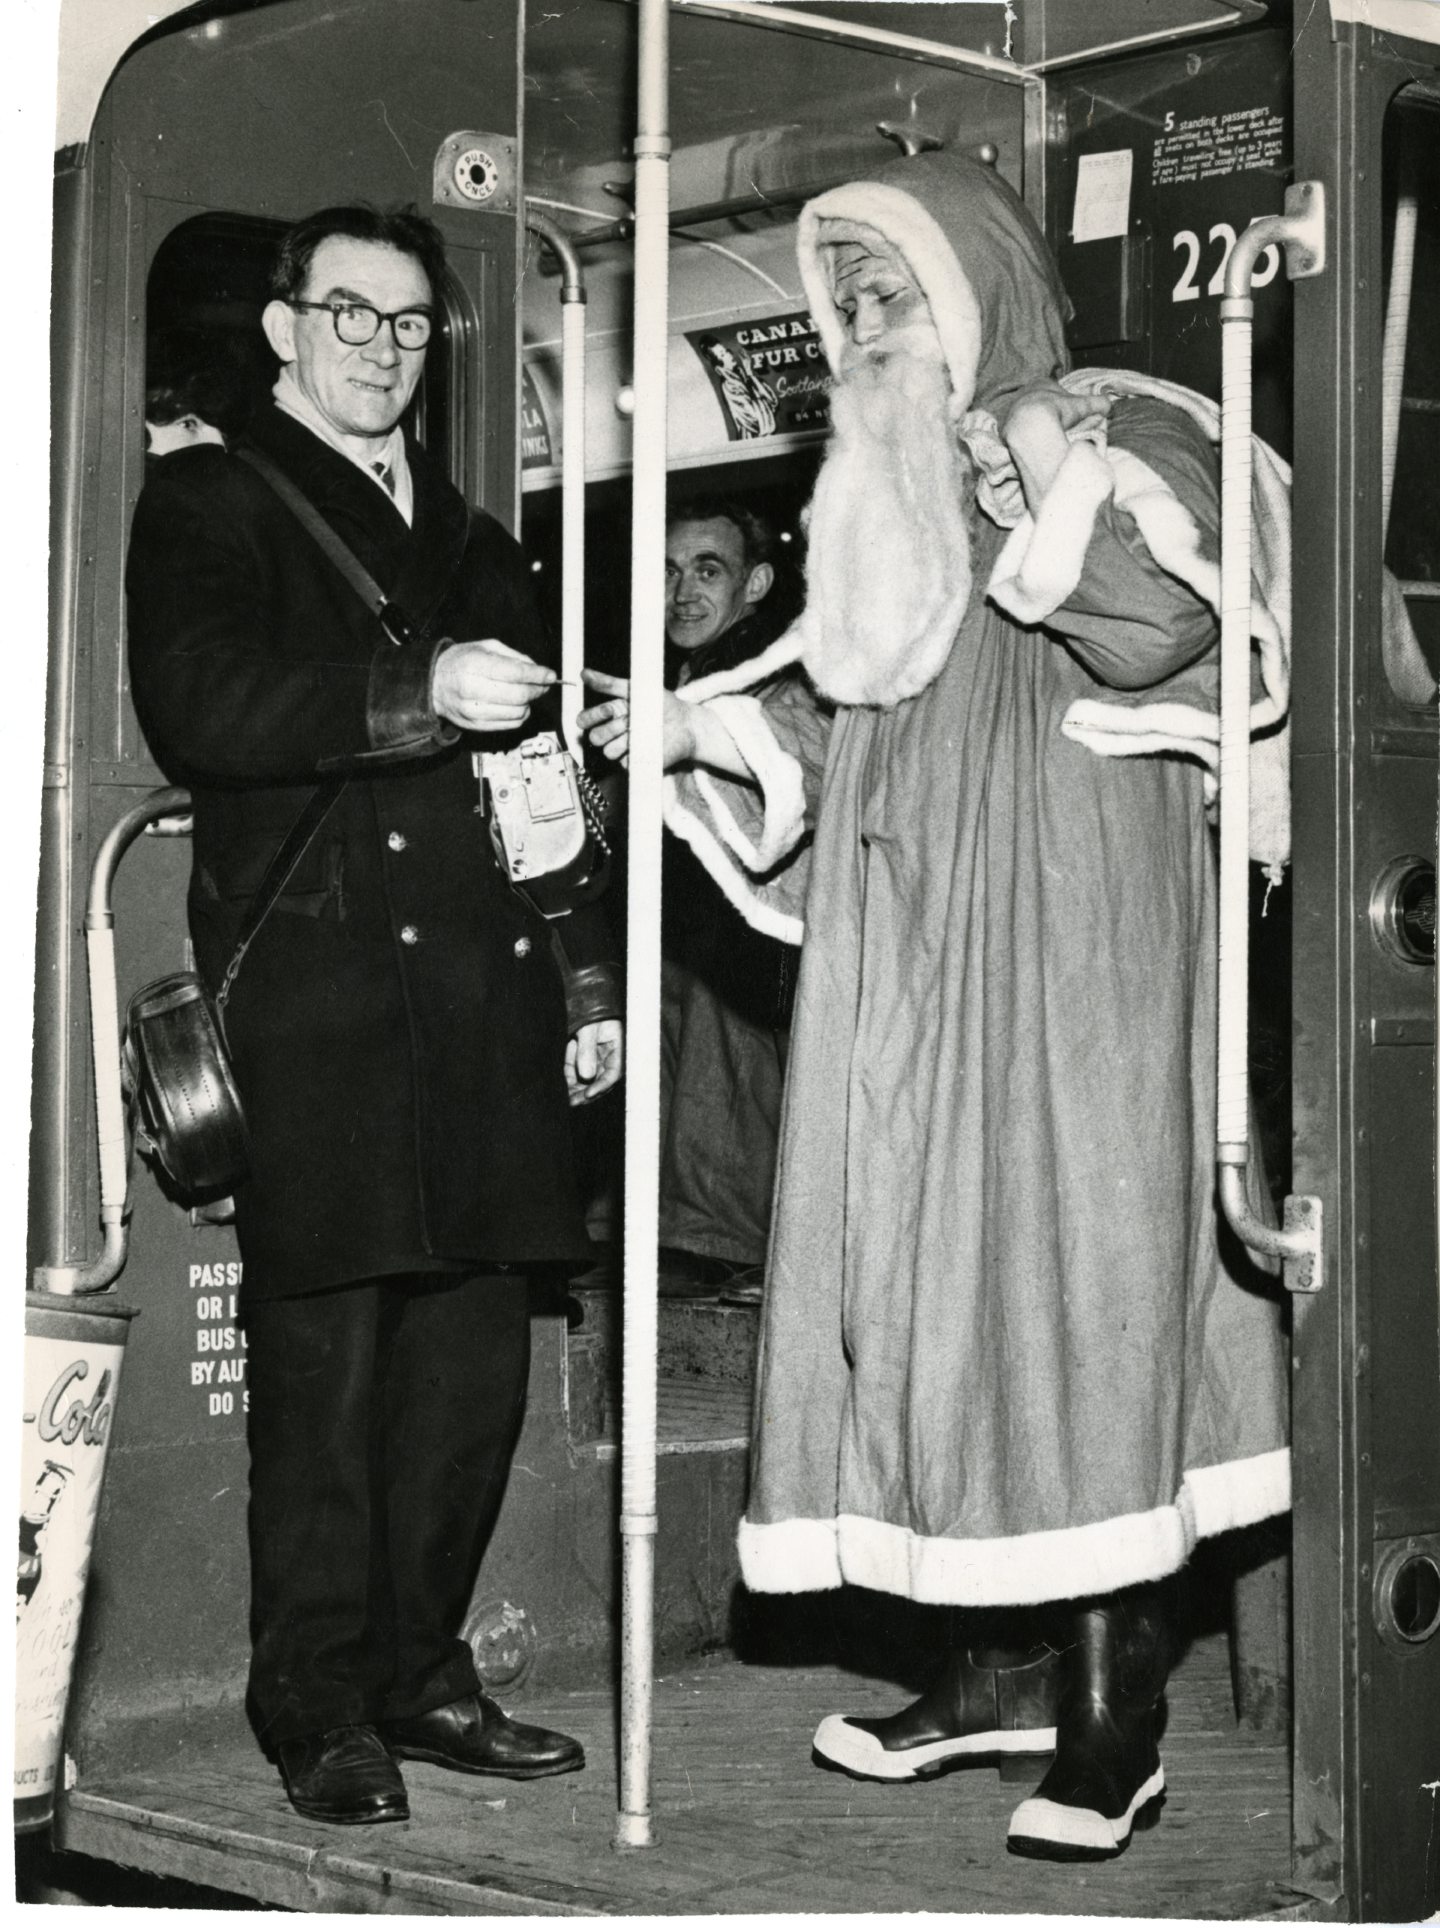 Santa getting off the Dundee Corporation bus to attend a party in 1964. Image: DC Thomson.